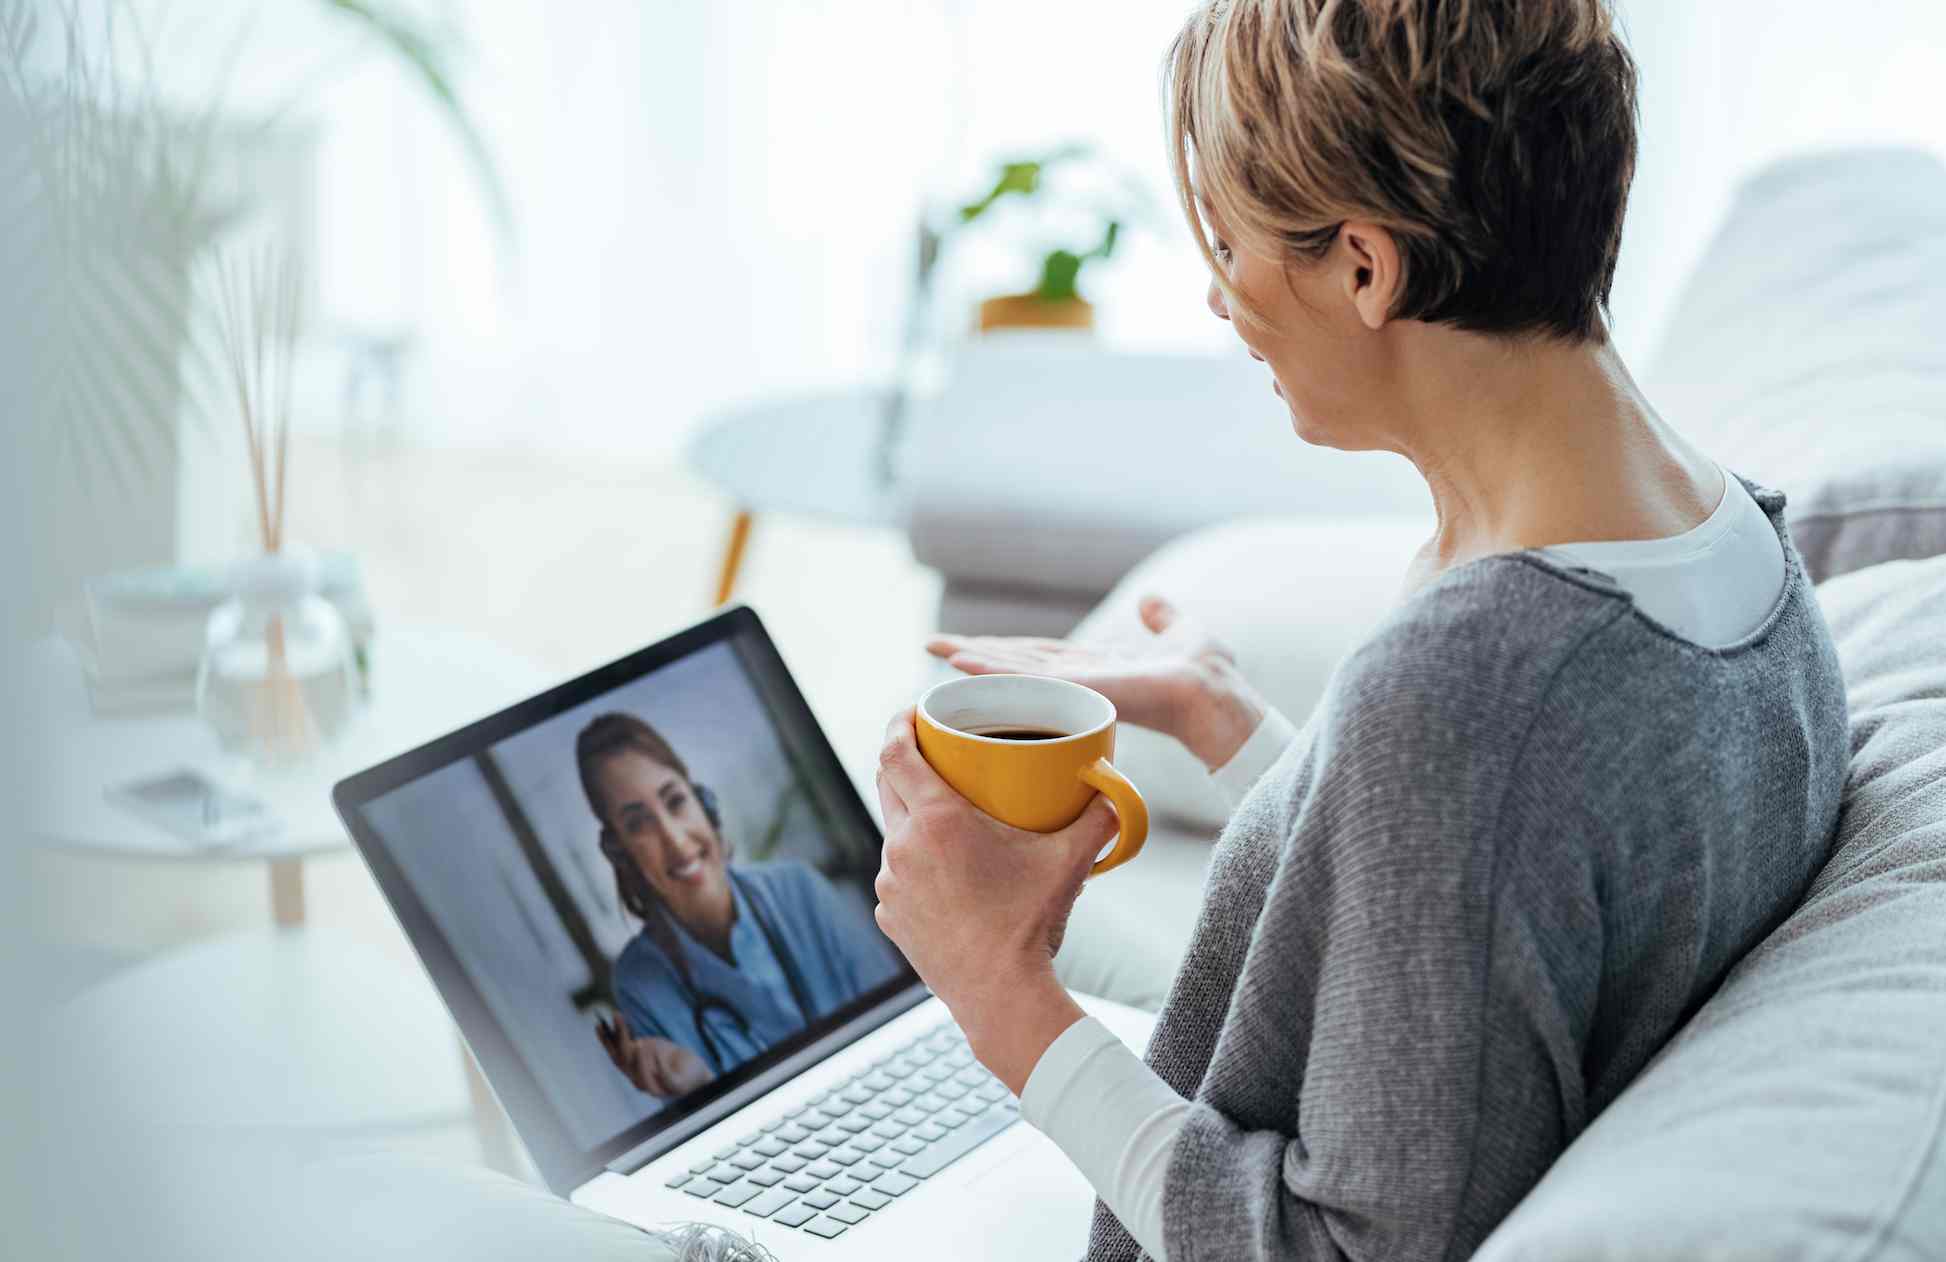 Consumers are flocking to telehealth because of COVID-19. They'll stay for the convenience